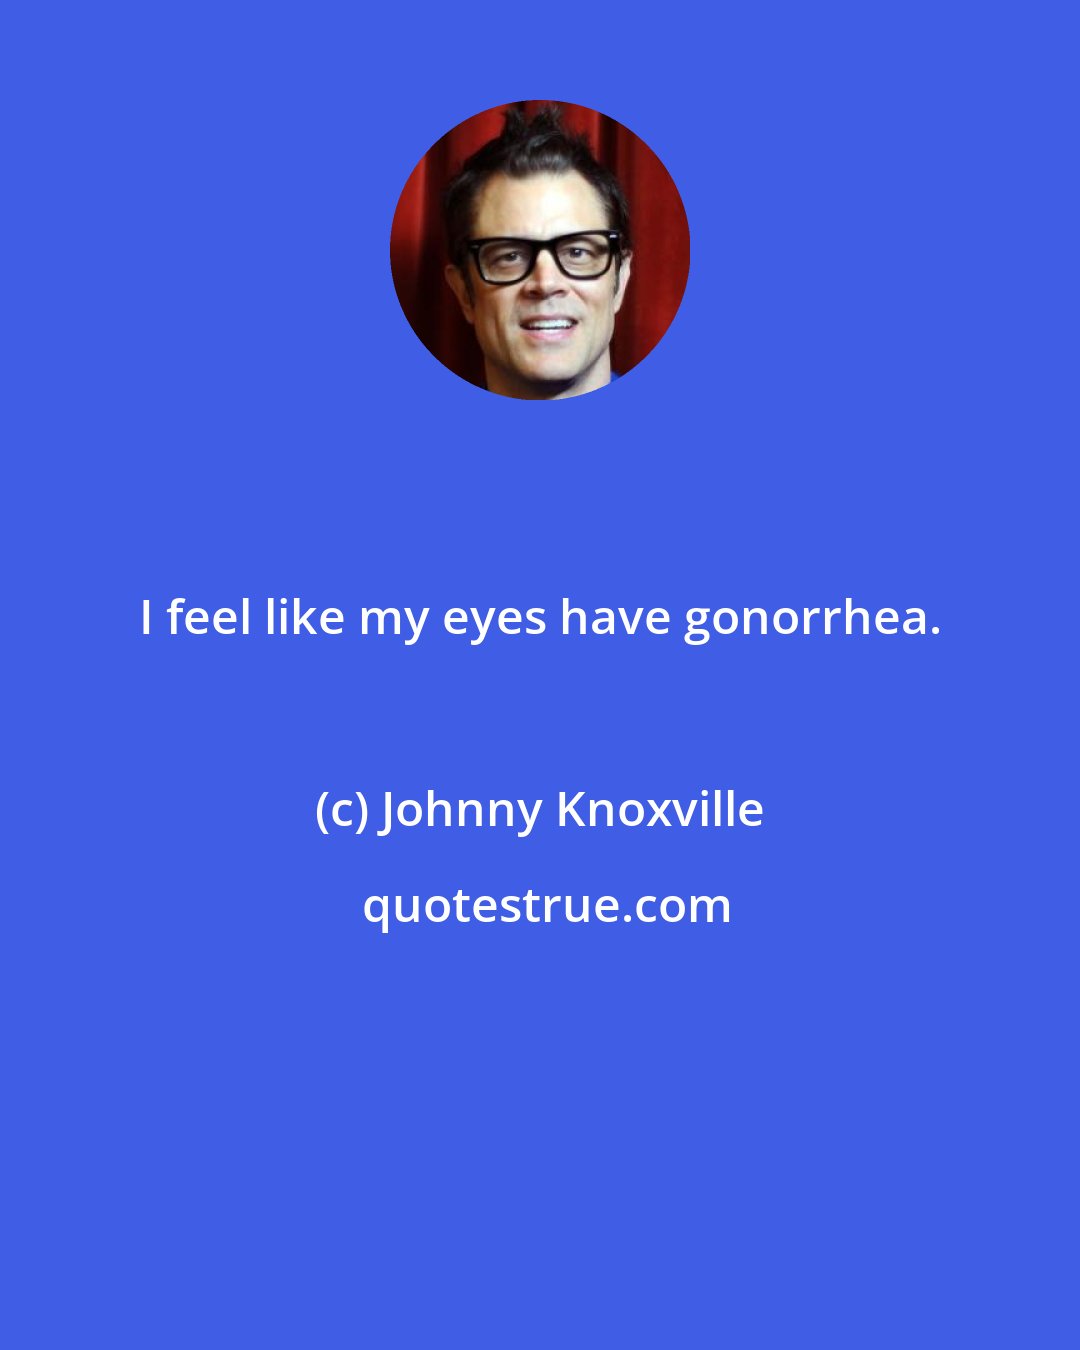 Johnny Knoxville: I feel like my eyes have gonorrhea.